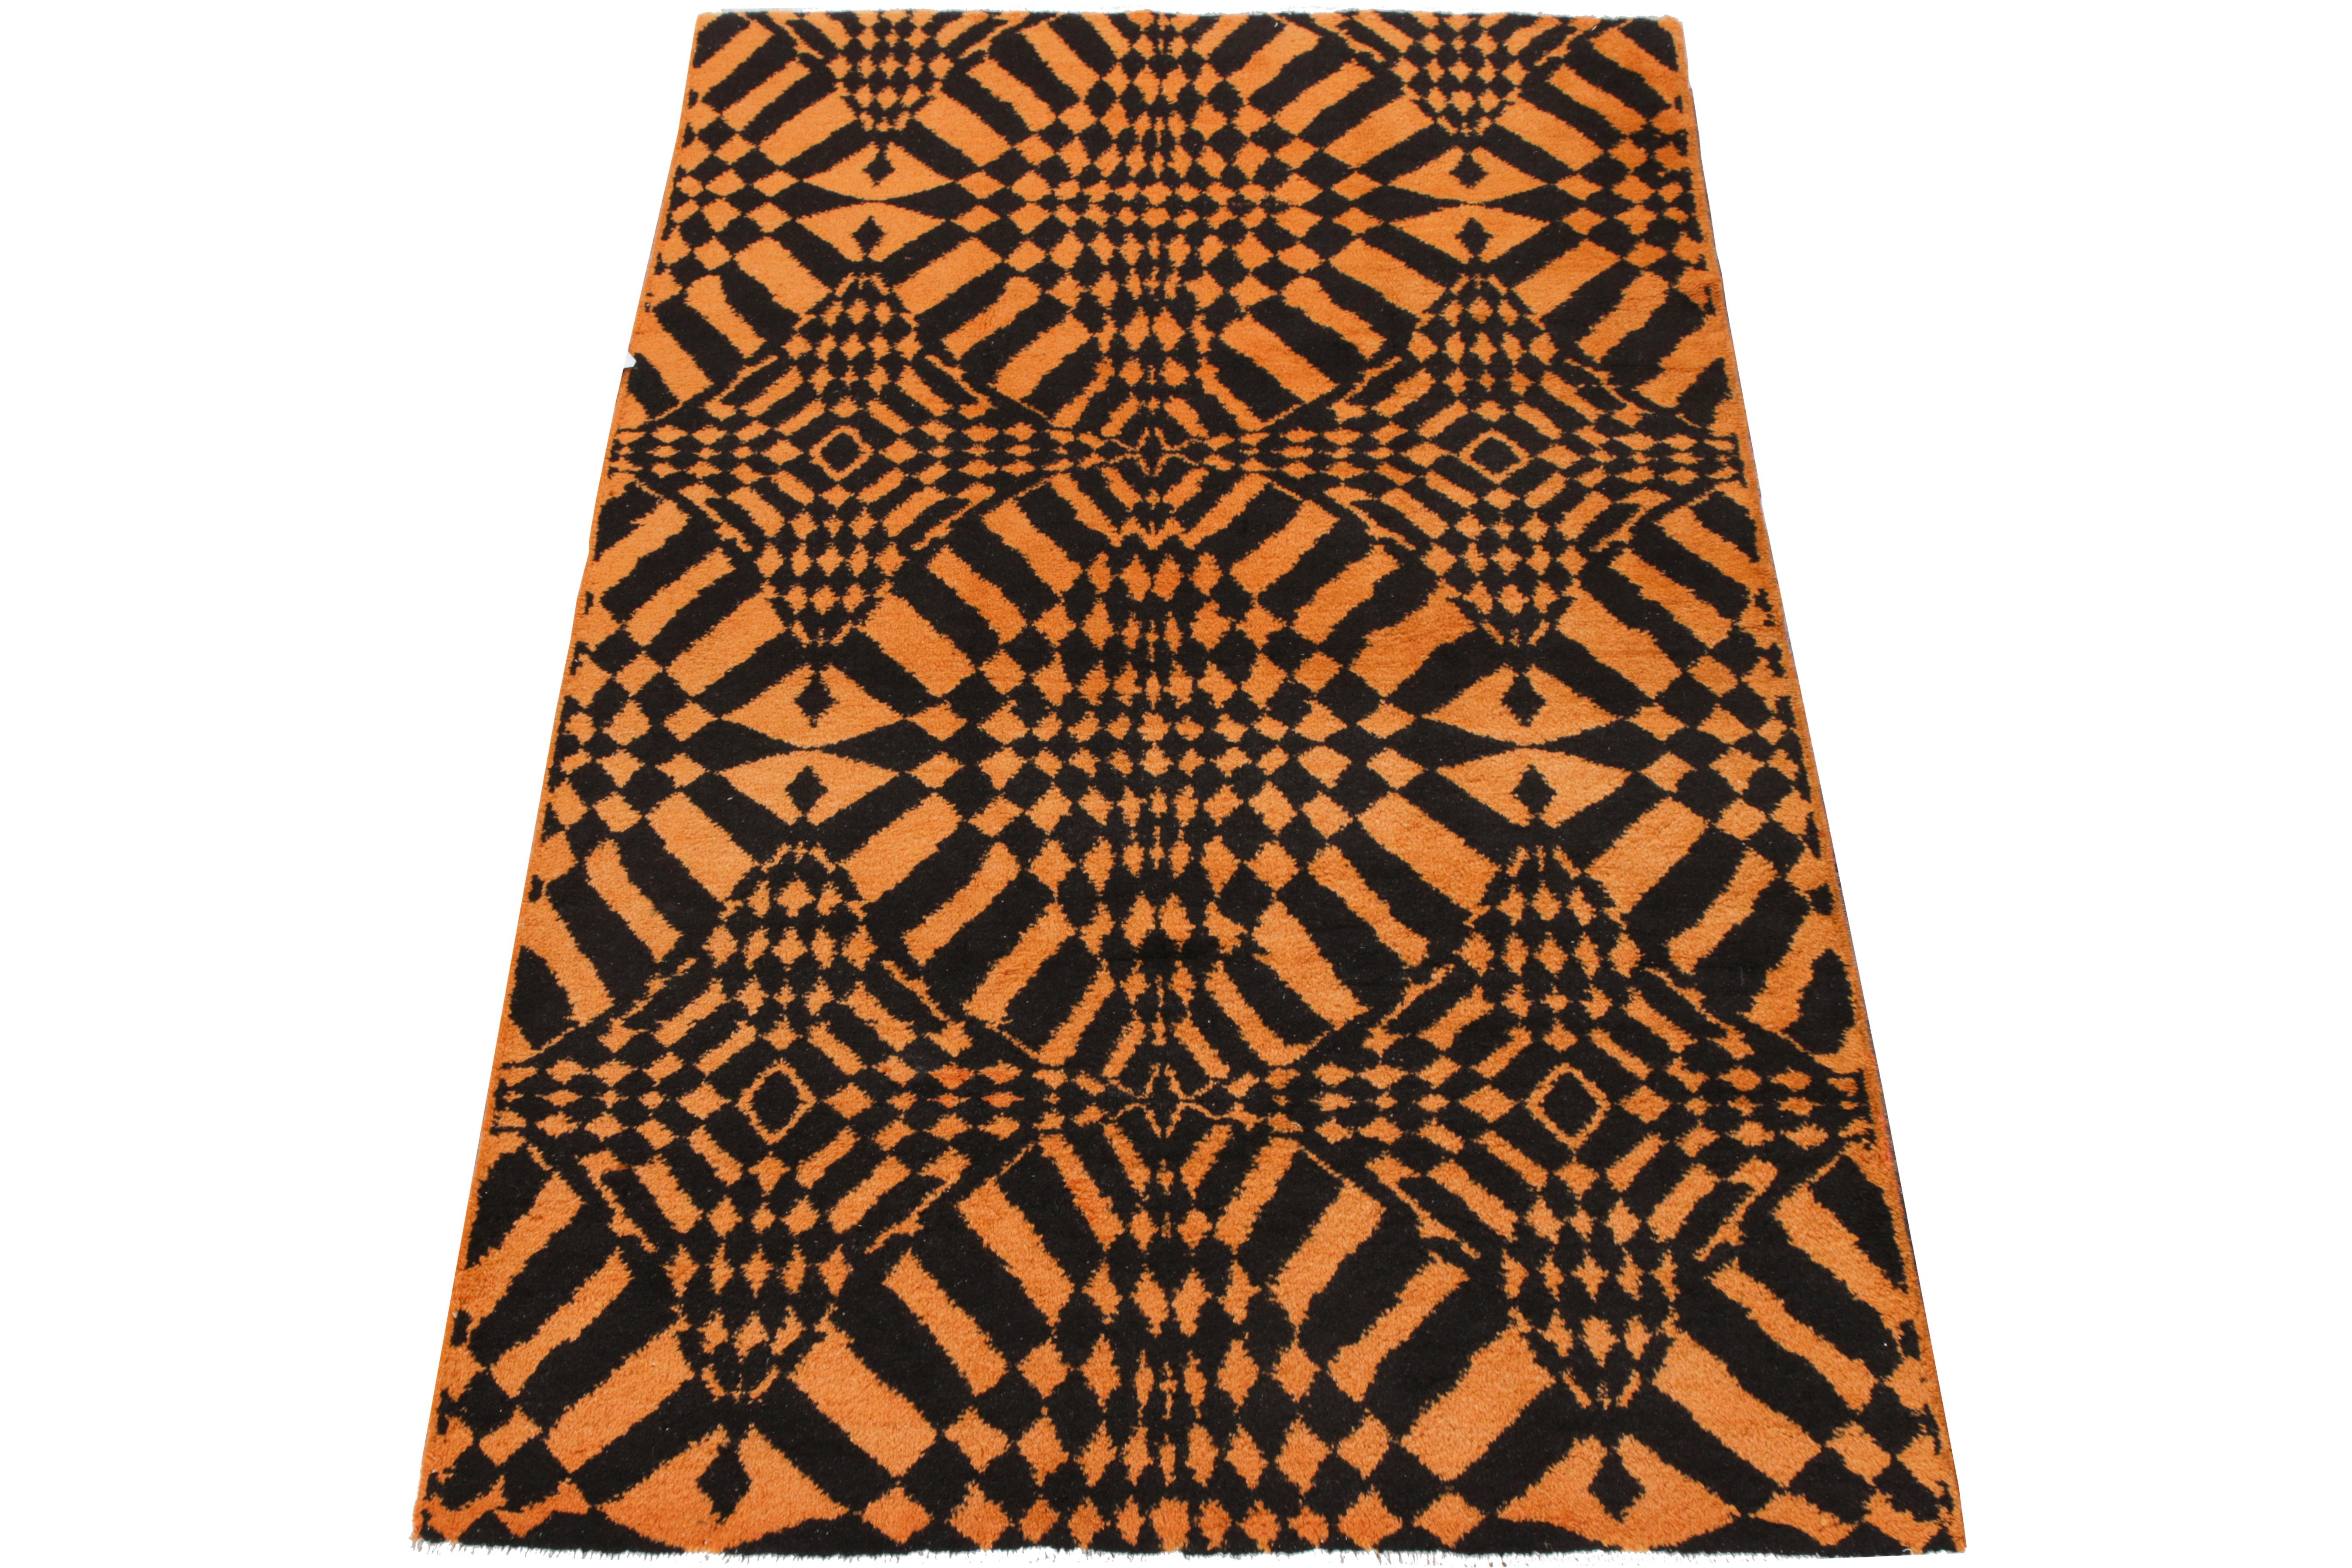 Hand-knotted in wool, a scintillating vintage 4x7 Art Deco rug from Rug & Kilim’s growing Mid-Century Pasha collection—featuring notable works of the iconic Turkish designer Zeki Muren. Originating from Turkey circa 1960-1970, this rug displays the